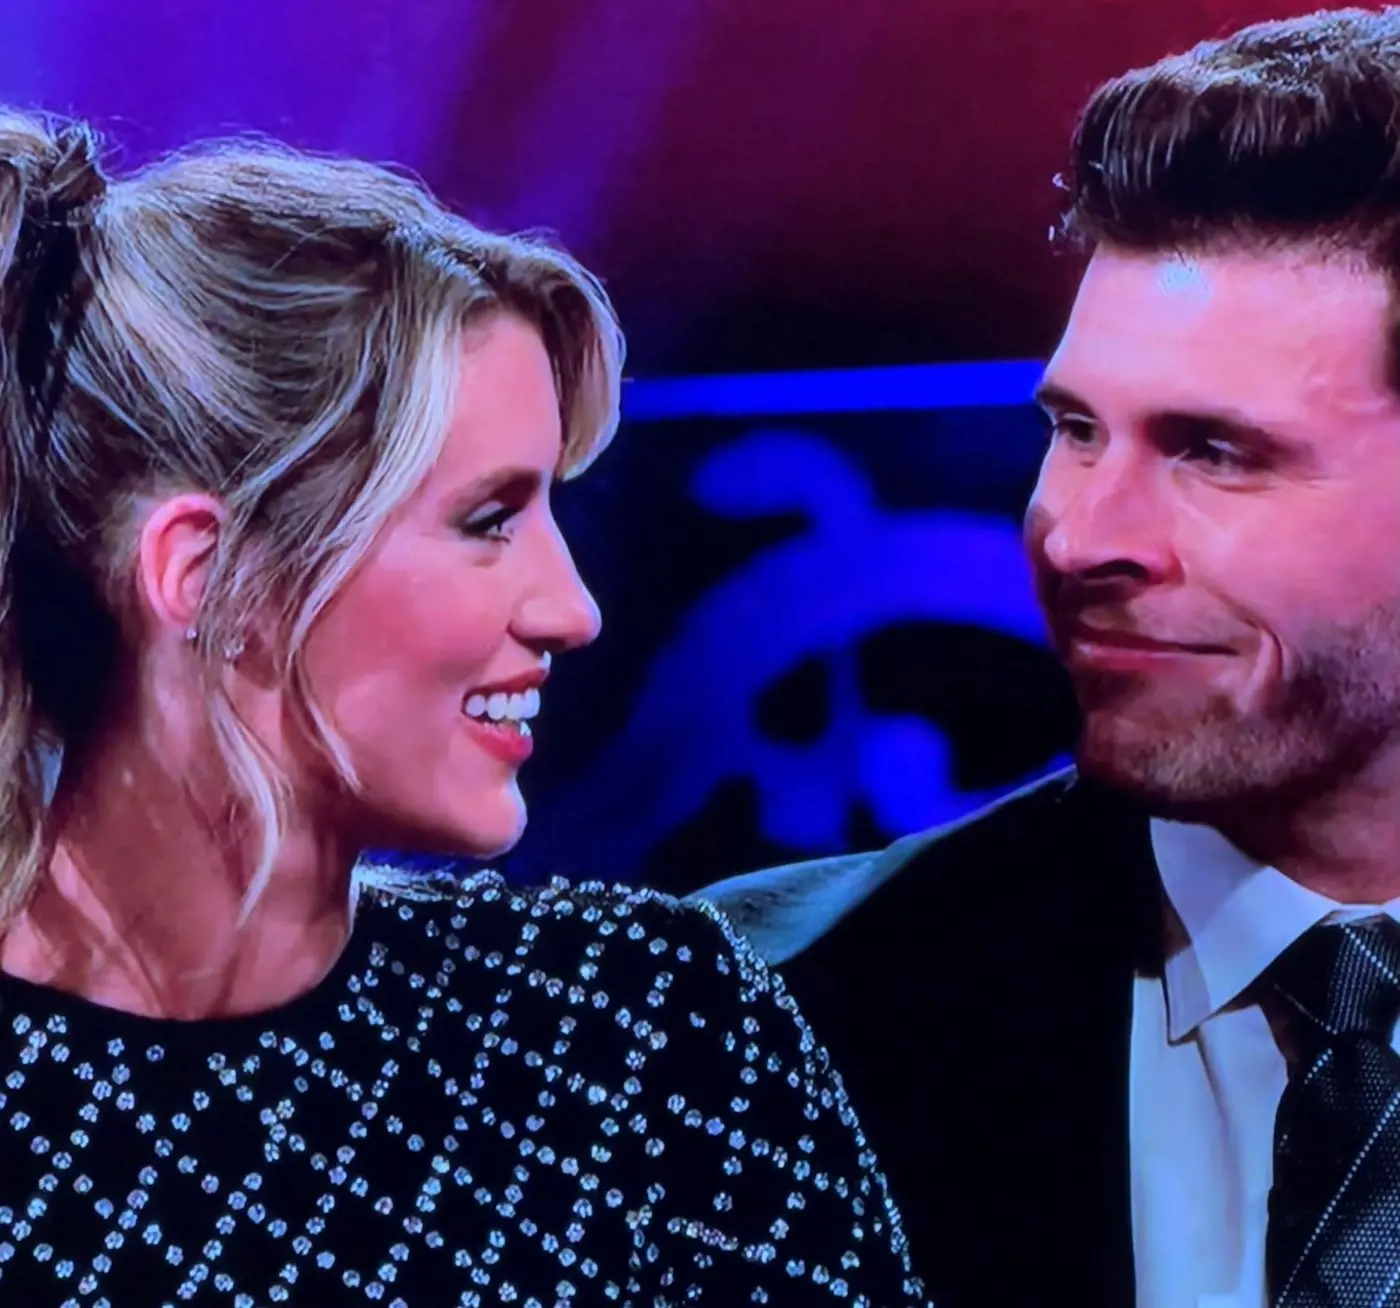 Kaity And Zach Looking At Each Other And Smiling On An Episode Of The Bachelor Season 27